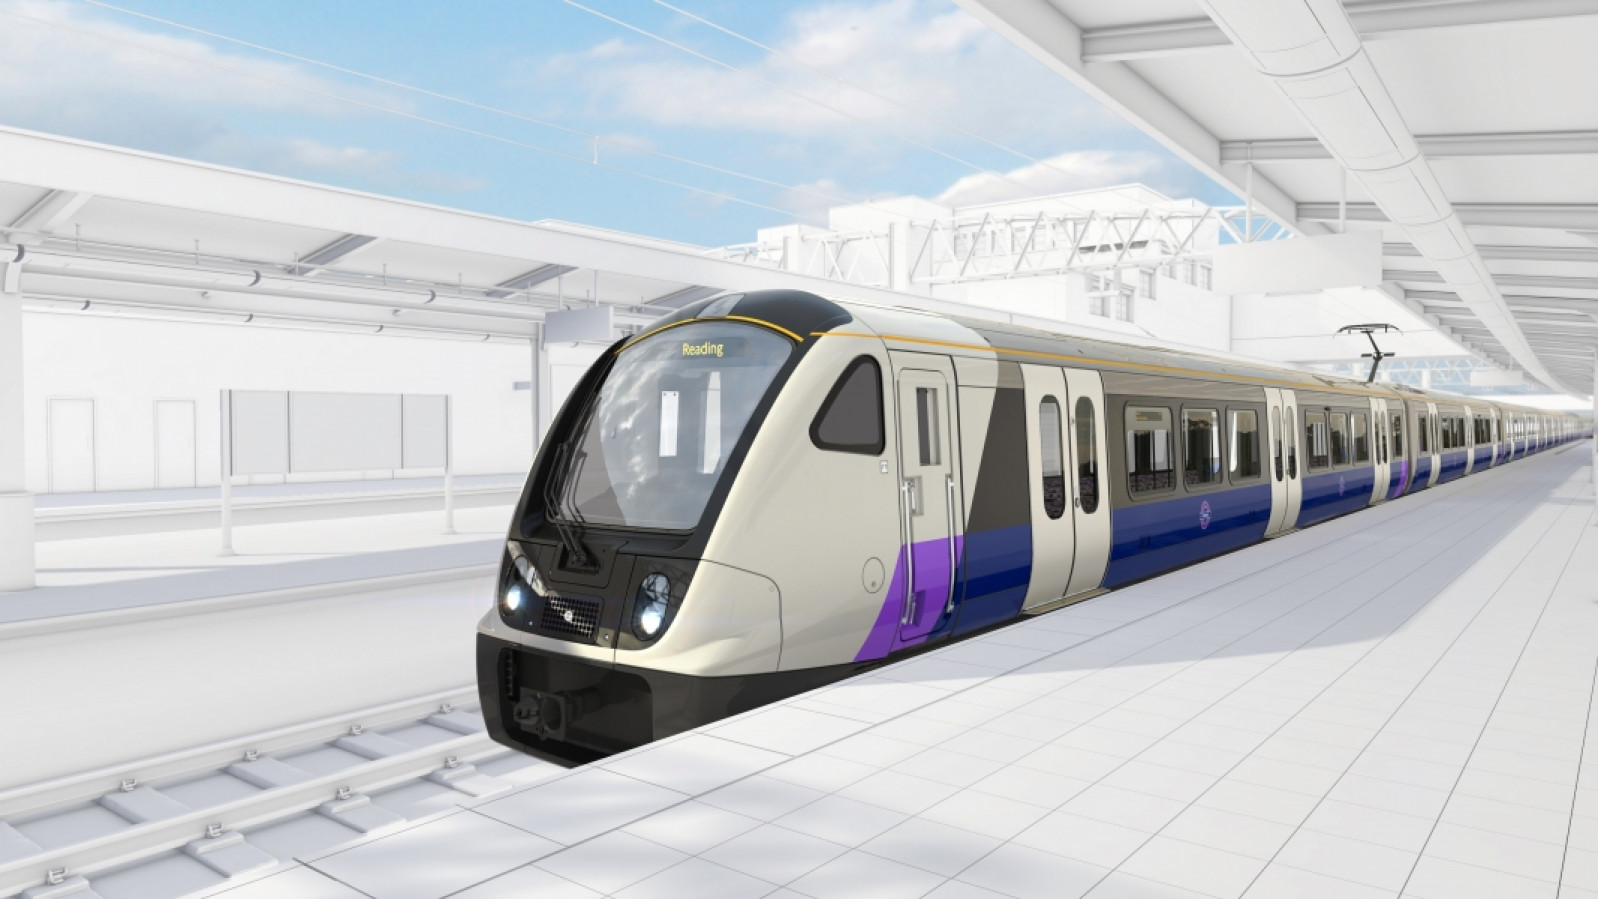 Mechan bags order boost from Crossrail contract